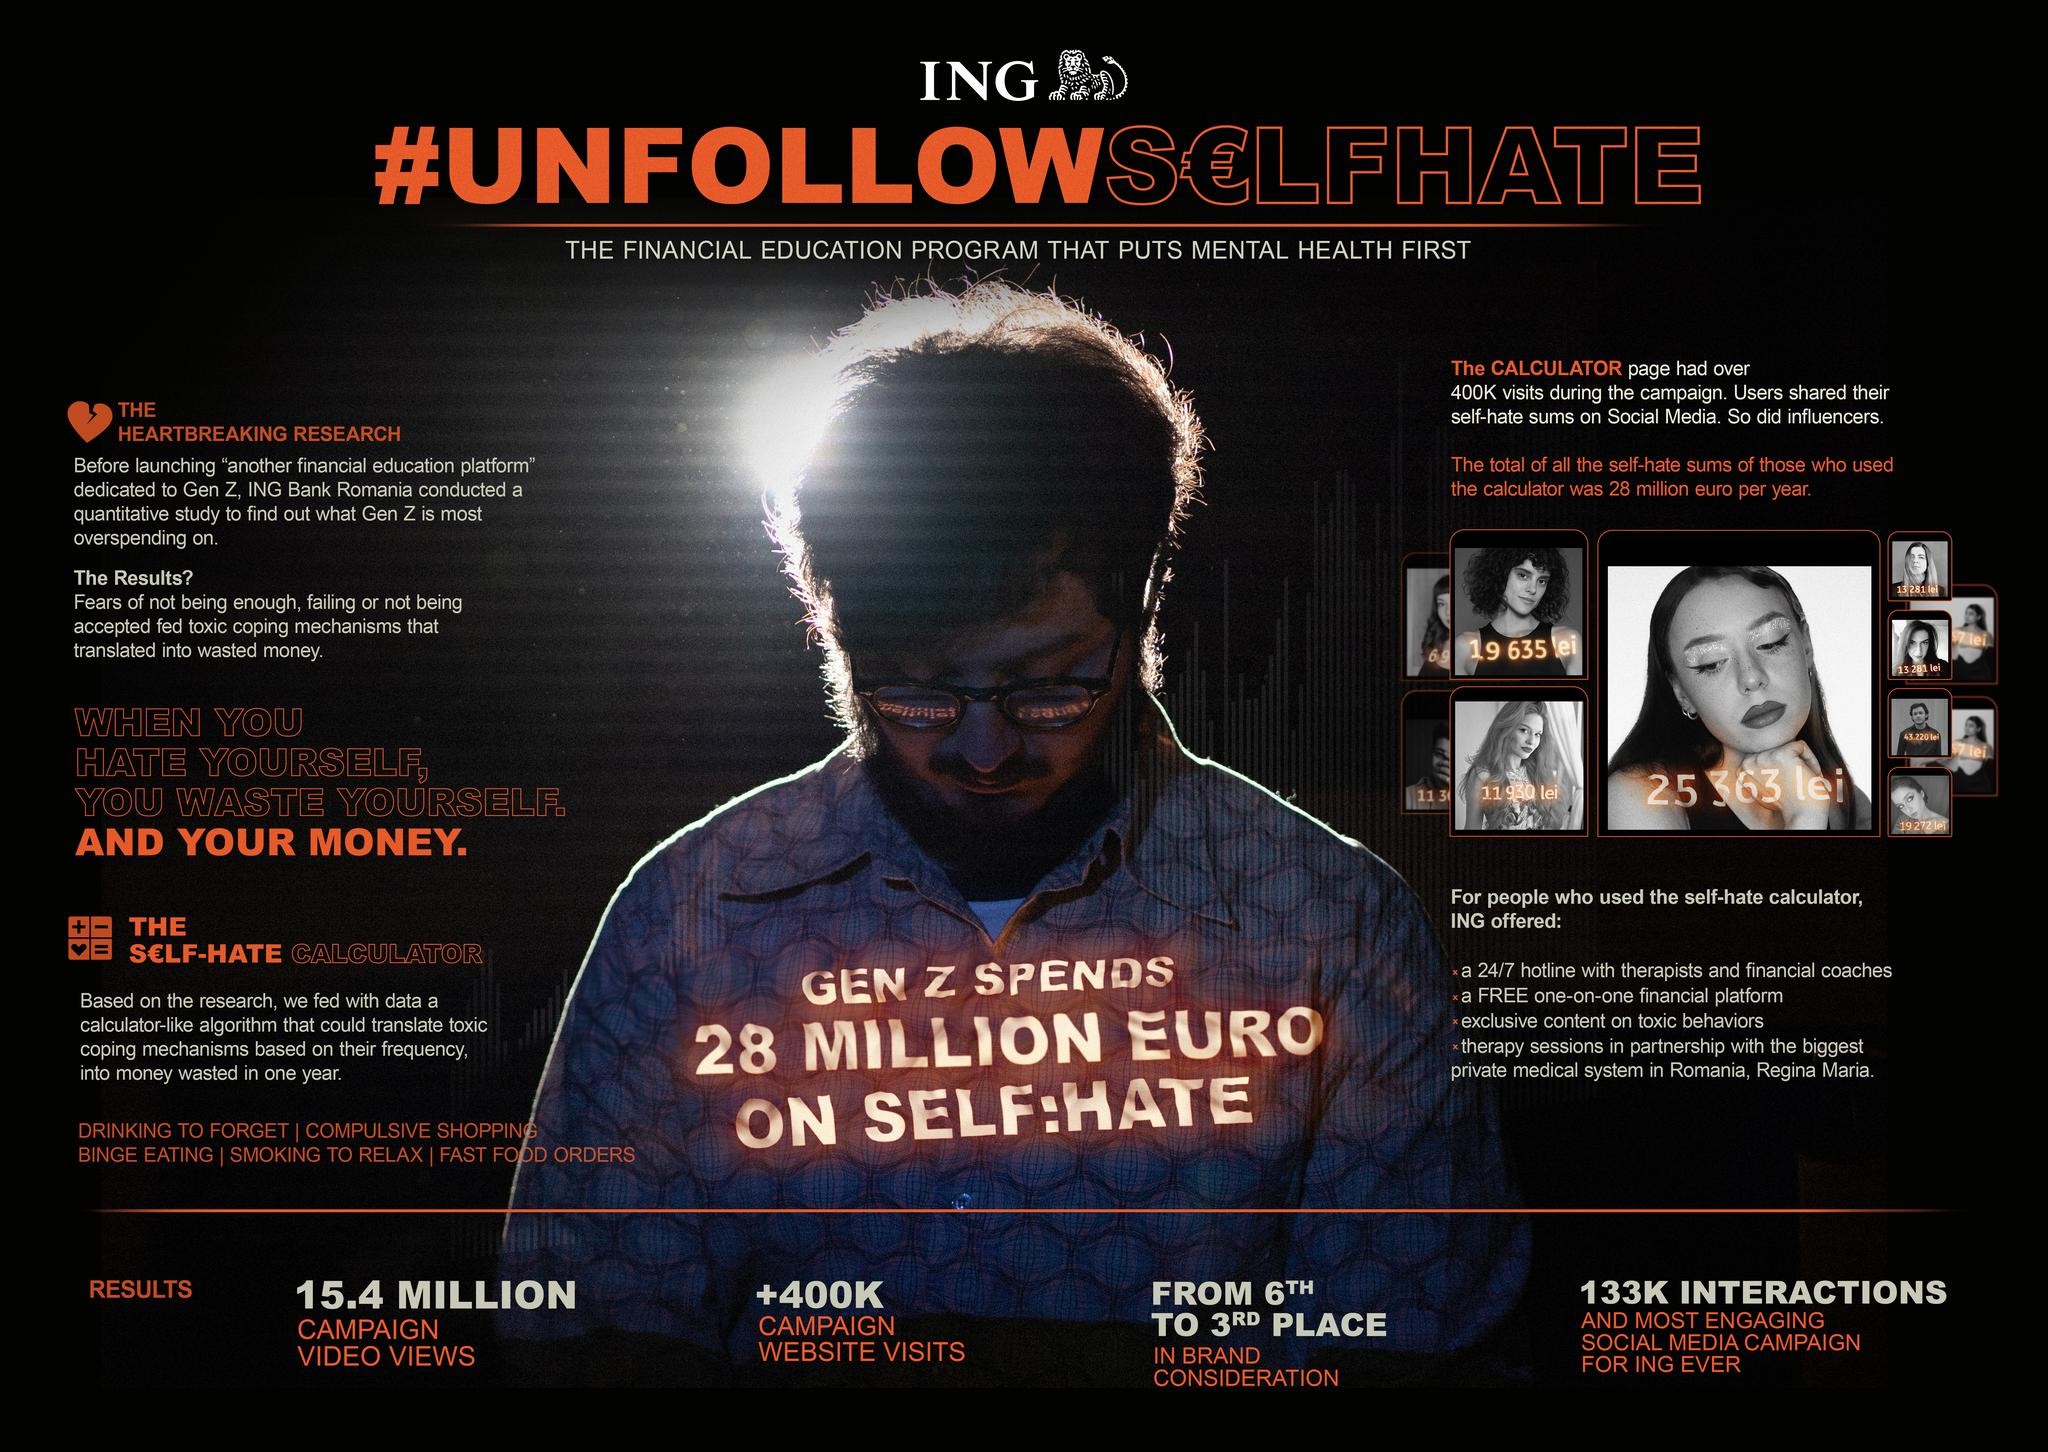 #UnfollowSelfHate. The cost of S€LF-HAT€